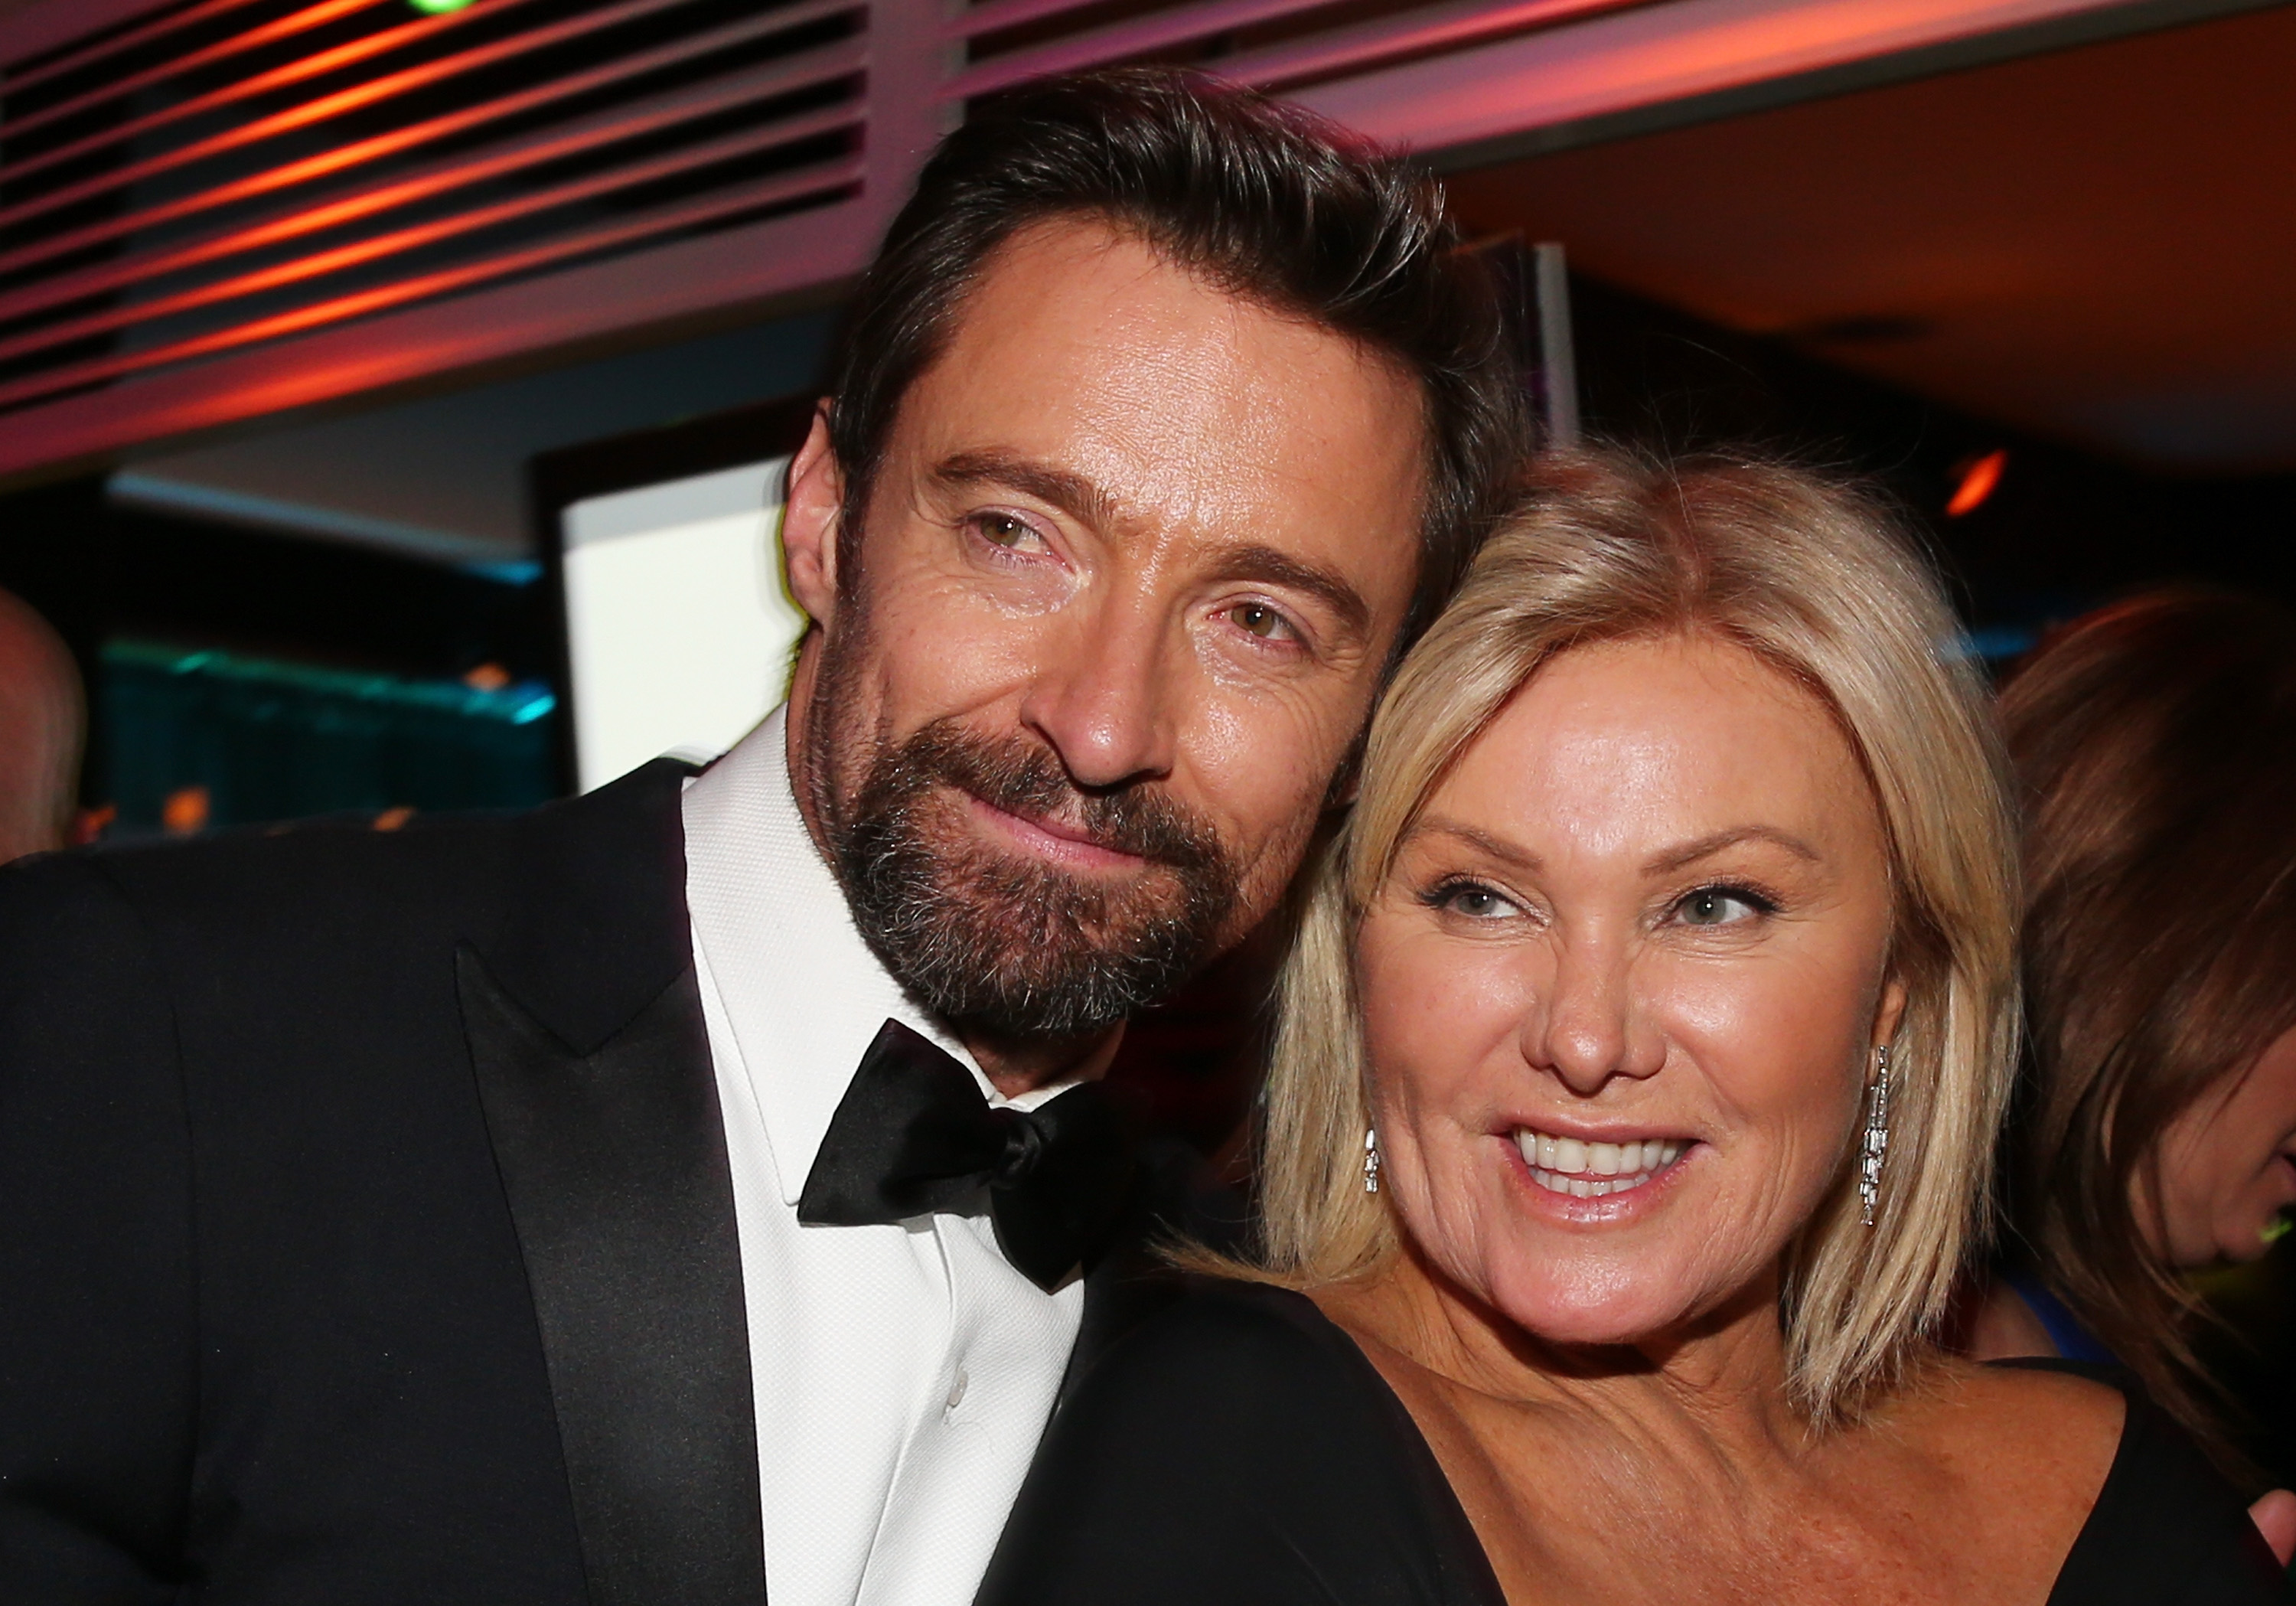 Hugh Jackman and Deborra-Lee Furness at NBC Universal's Golden Globes Post-Party on January 13, 2013. (Christopher Polk/NBC—NBC via Getty Images)